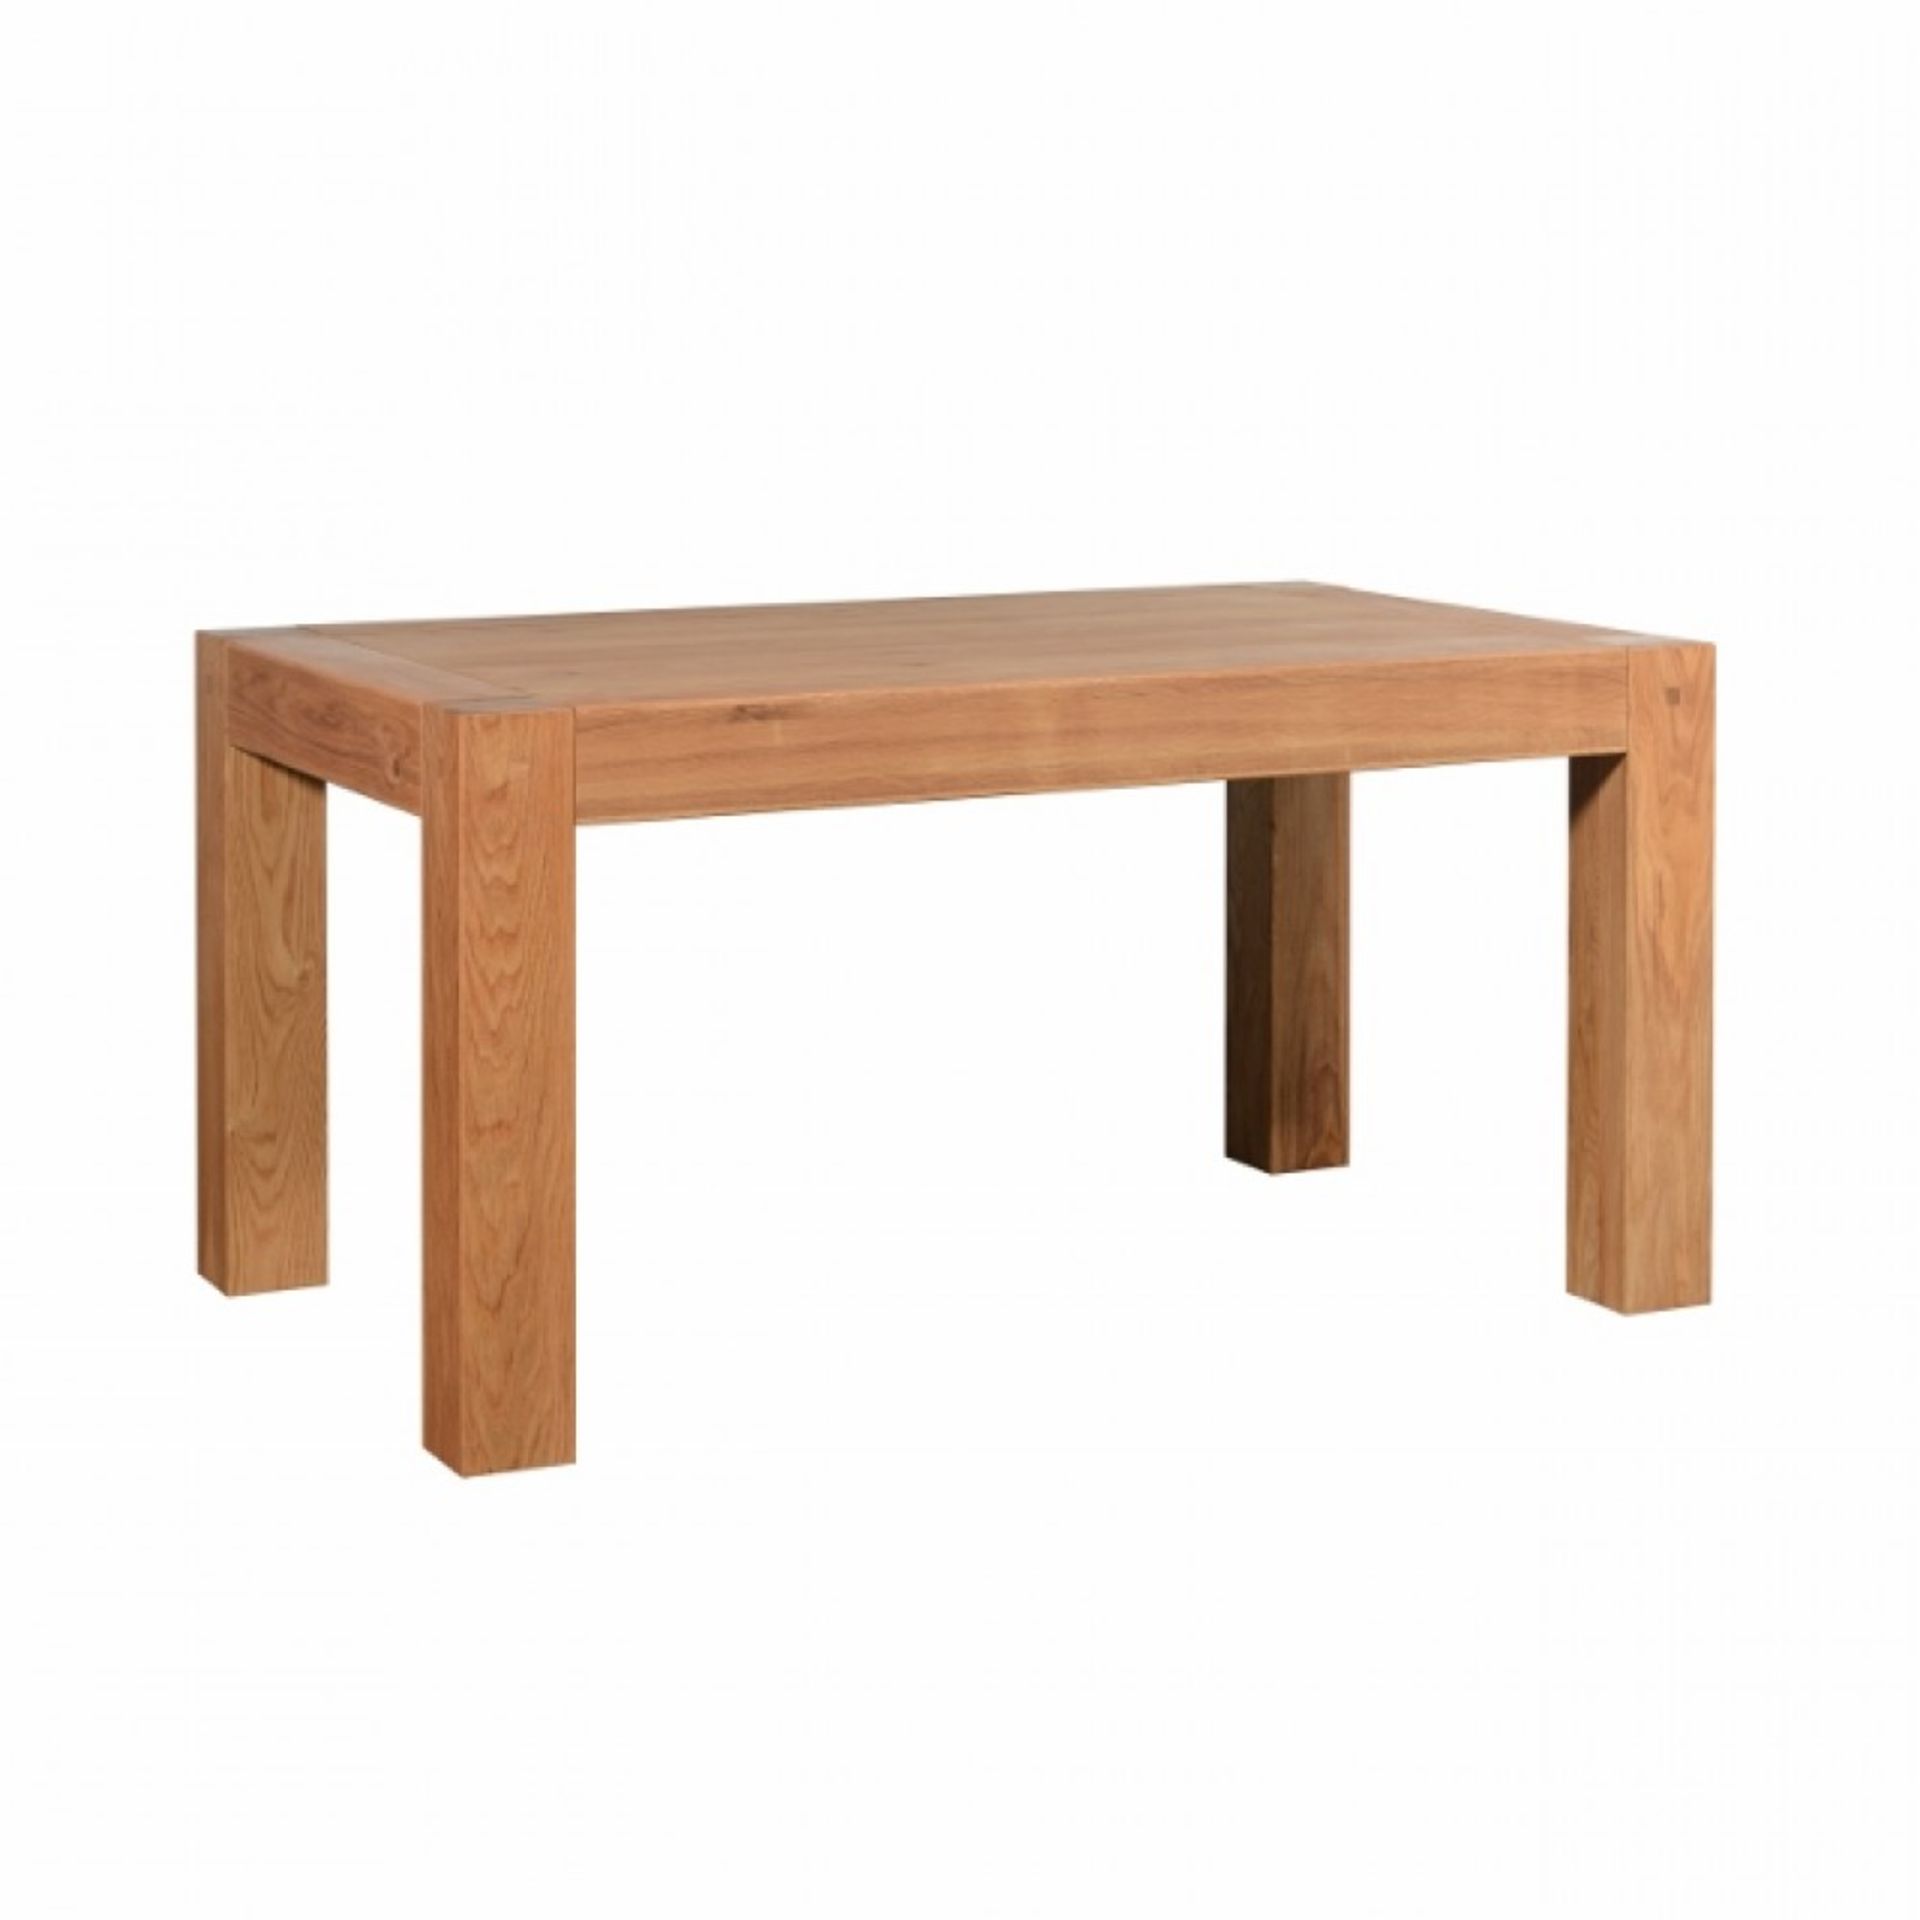 Halo Oregon Dining Table The Oregon Dining Table from Halo has been produced by hand and made as a